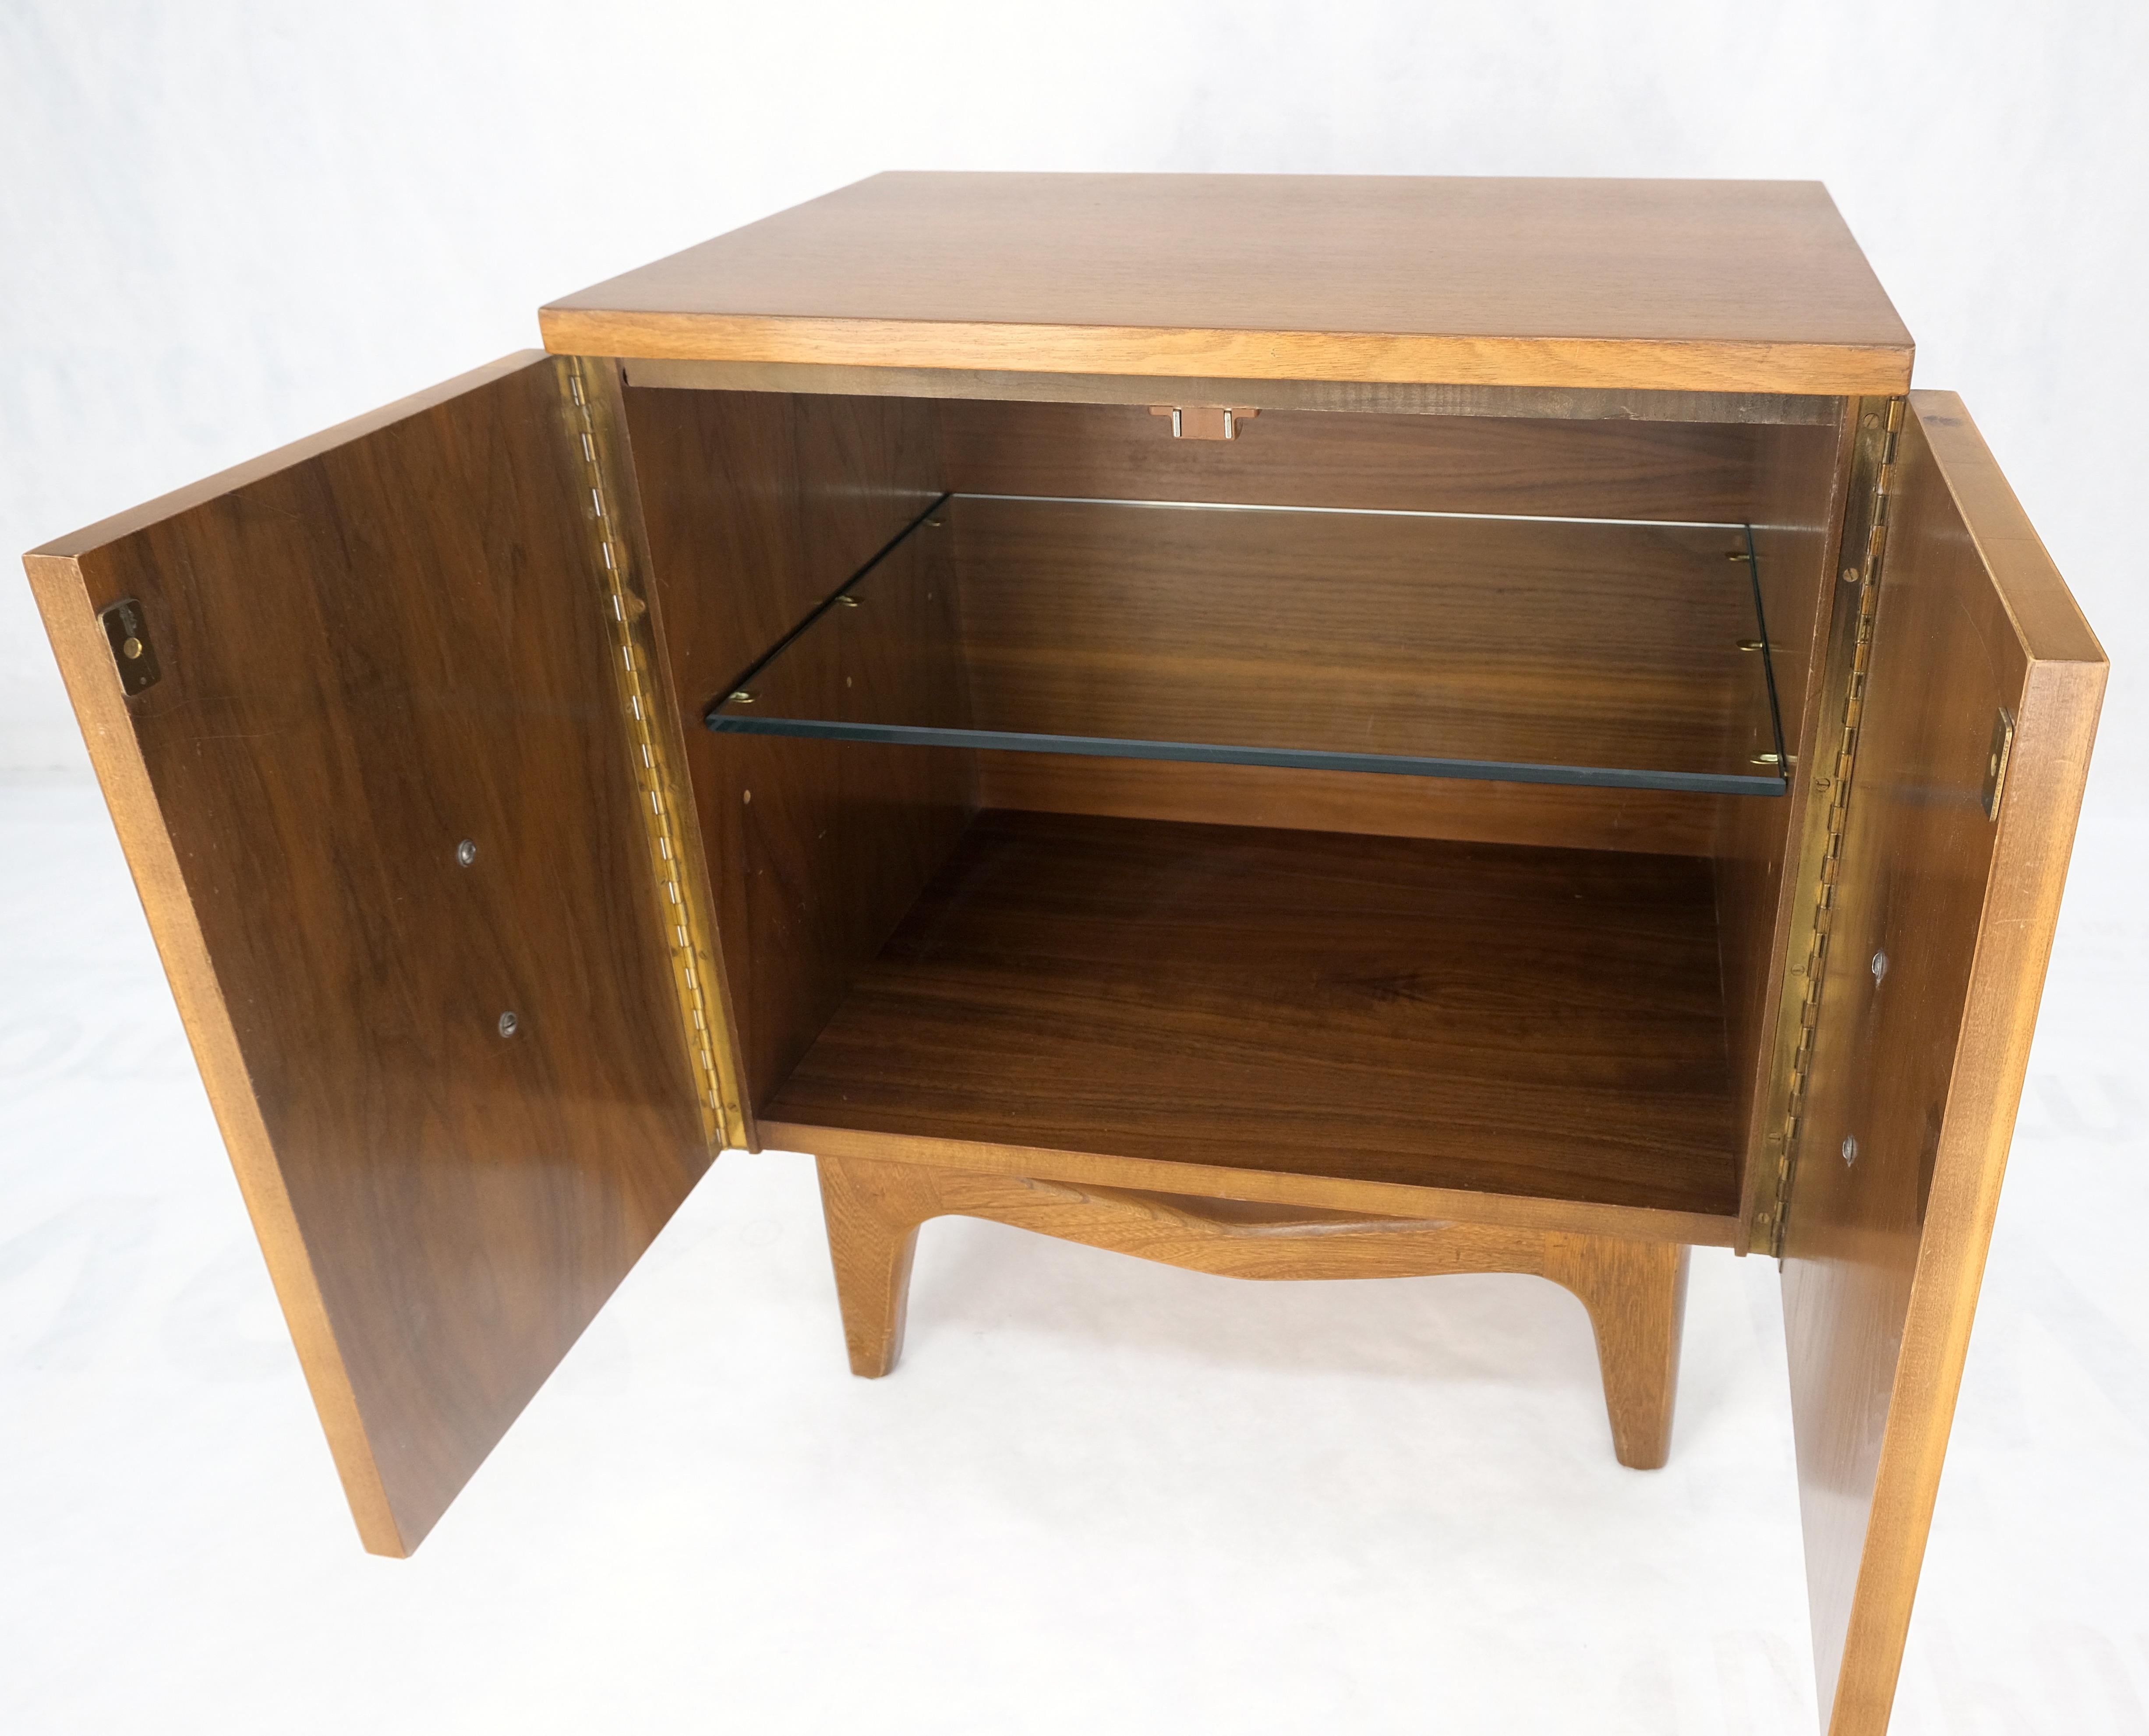 American Light Walnut Banana Shape Pulls Two Doors End Table Nightstand Mint! For Sale